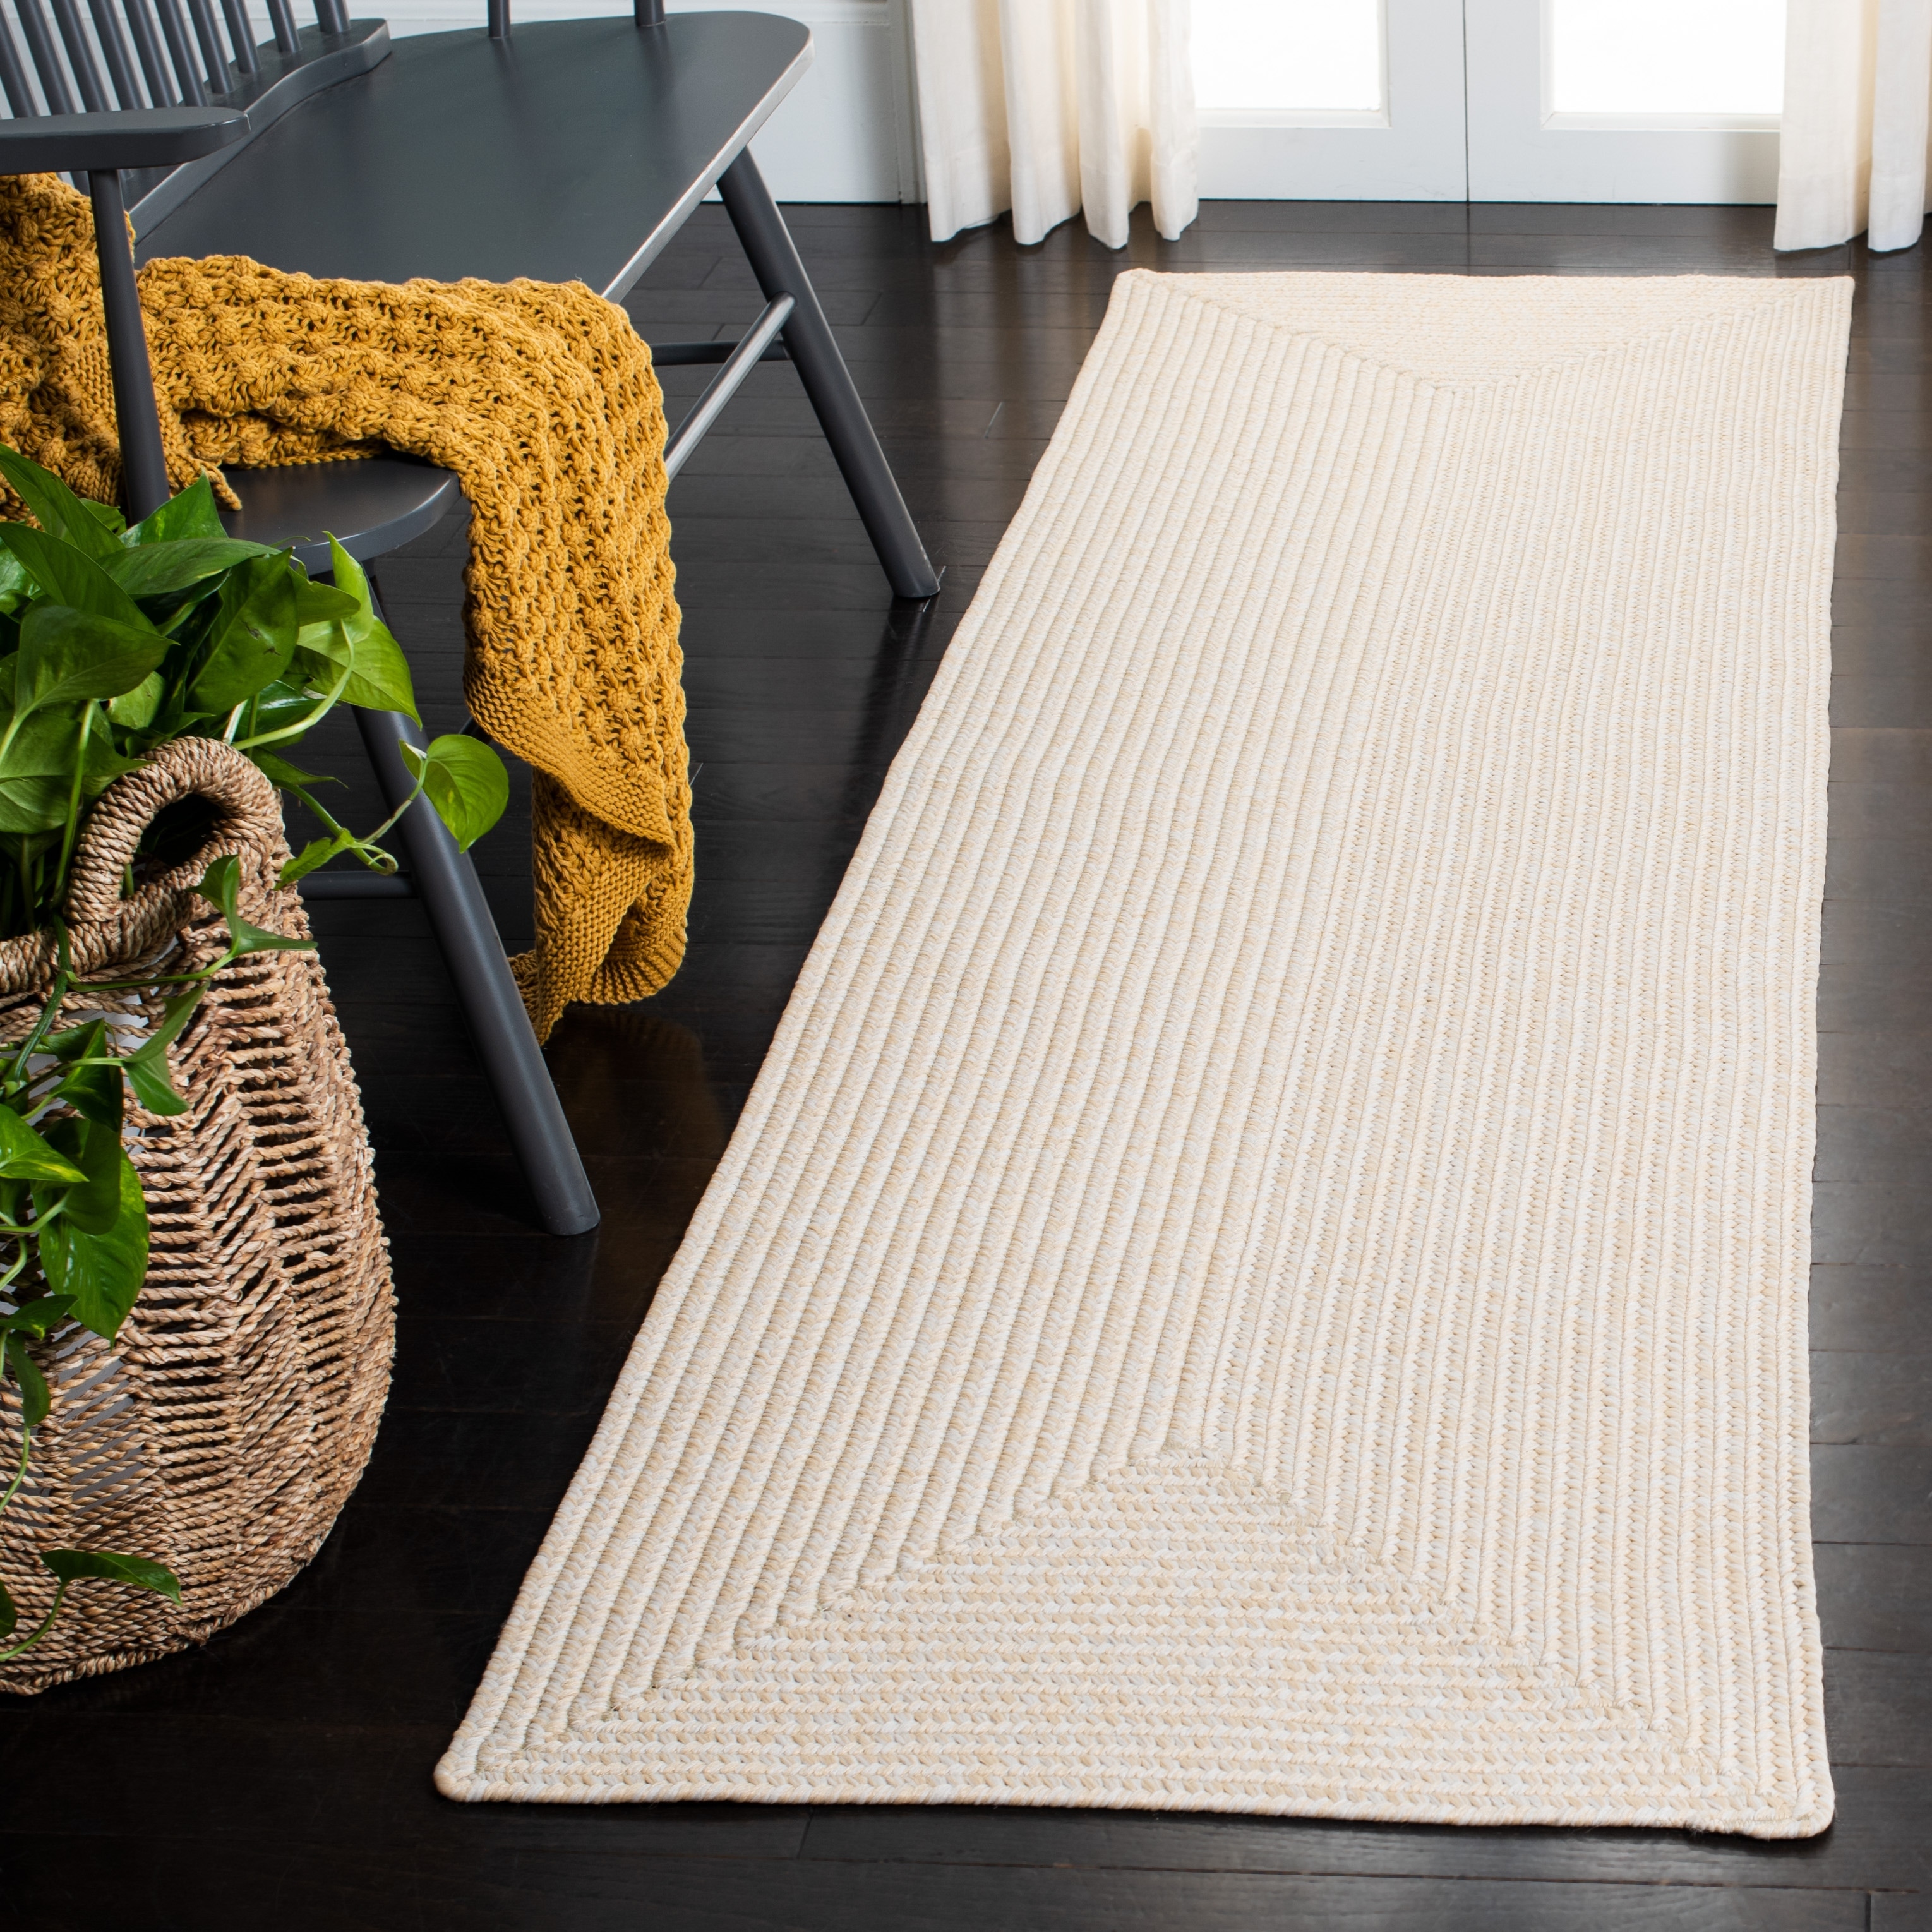 https://ak1.ostkcdn.com/images/products/is/images/direct/0de82cdc4533cd3ca34ac2f360601c2b7aacb694/SAFAVIEH-Handmade-Braided-Country-Casual-Lavada-Rug.jpg